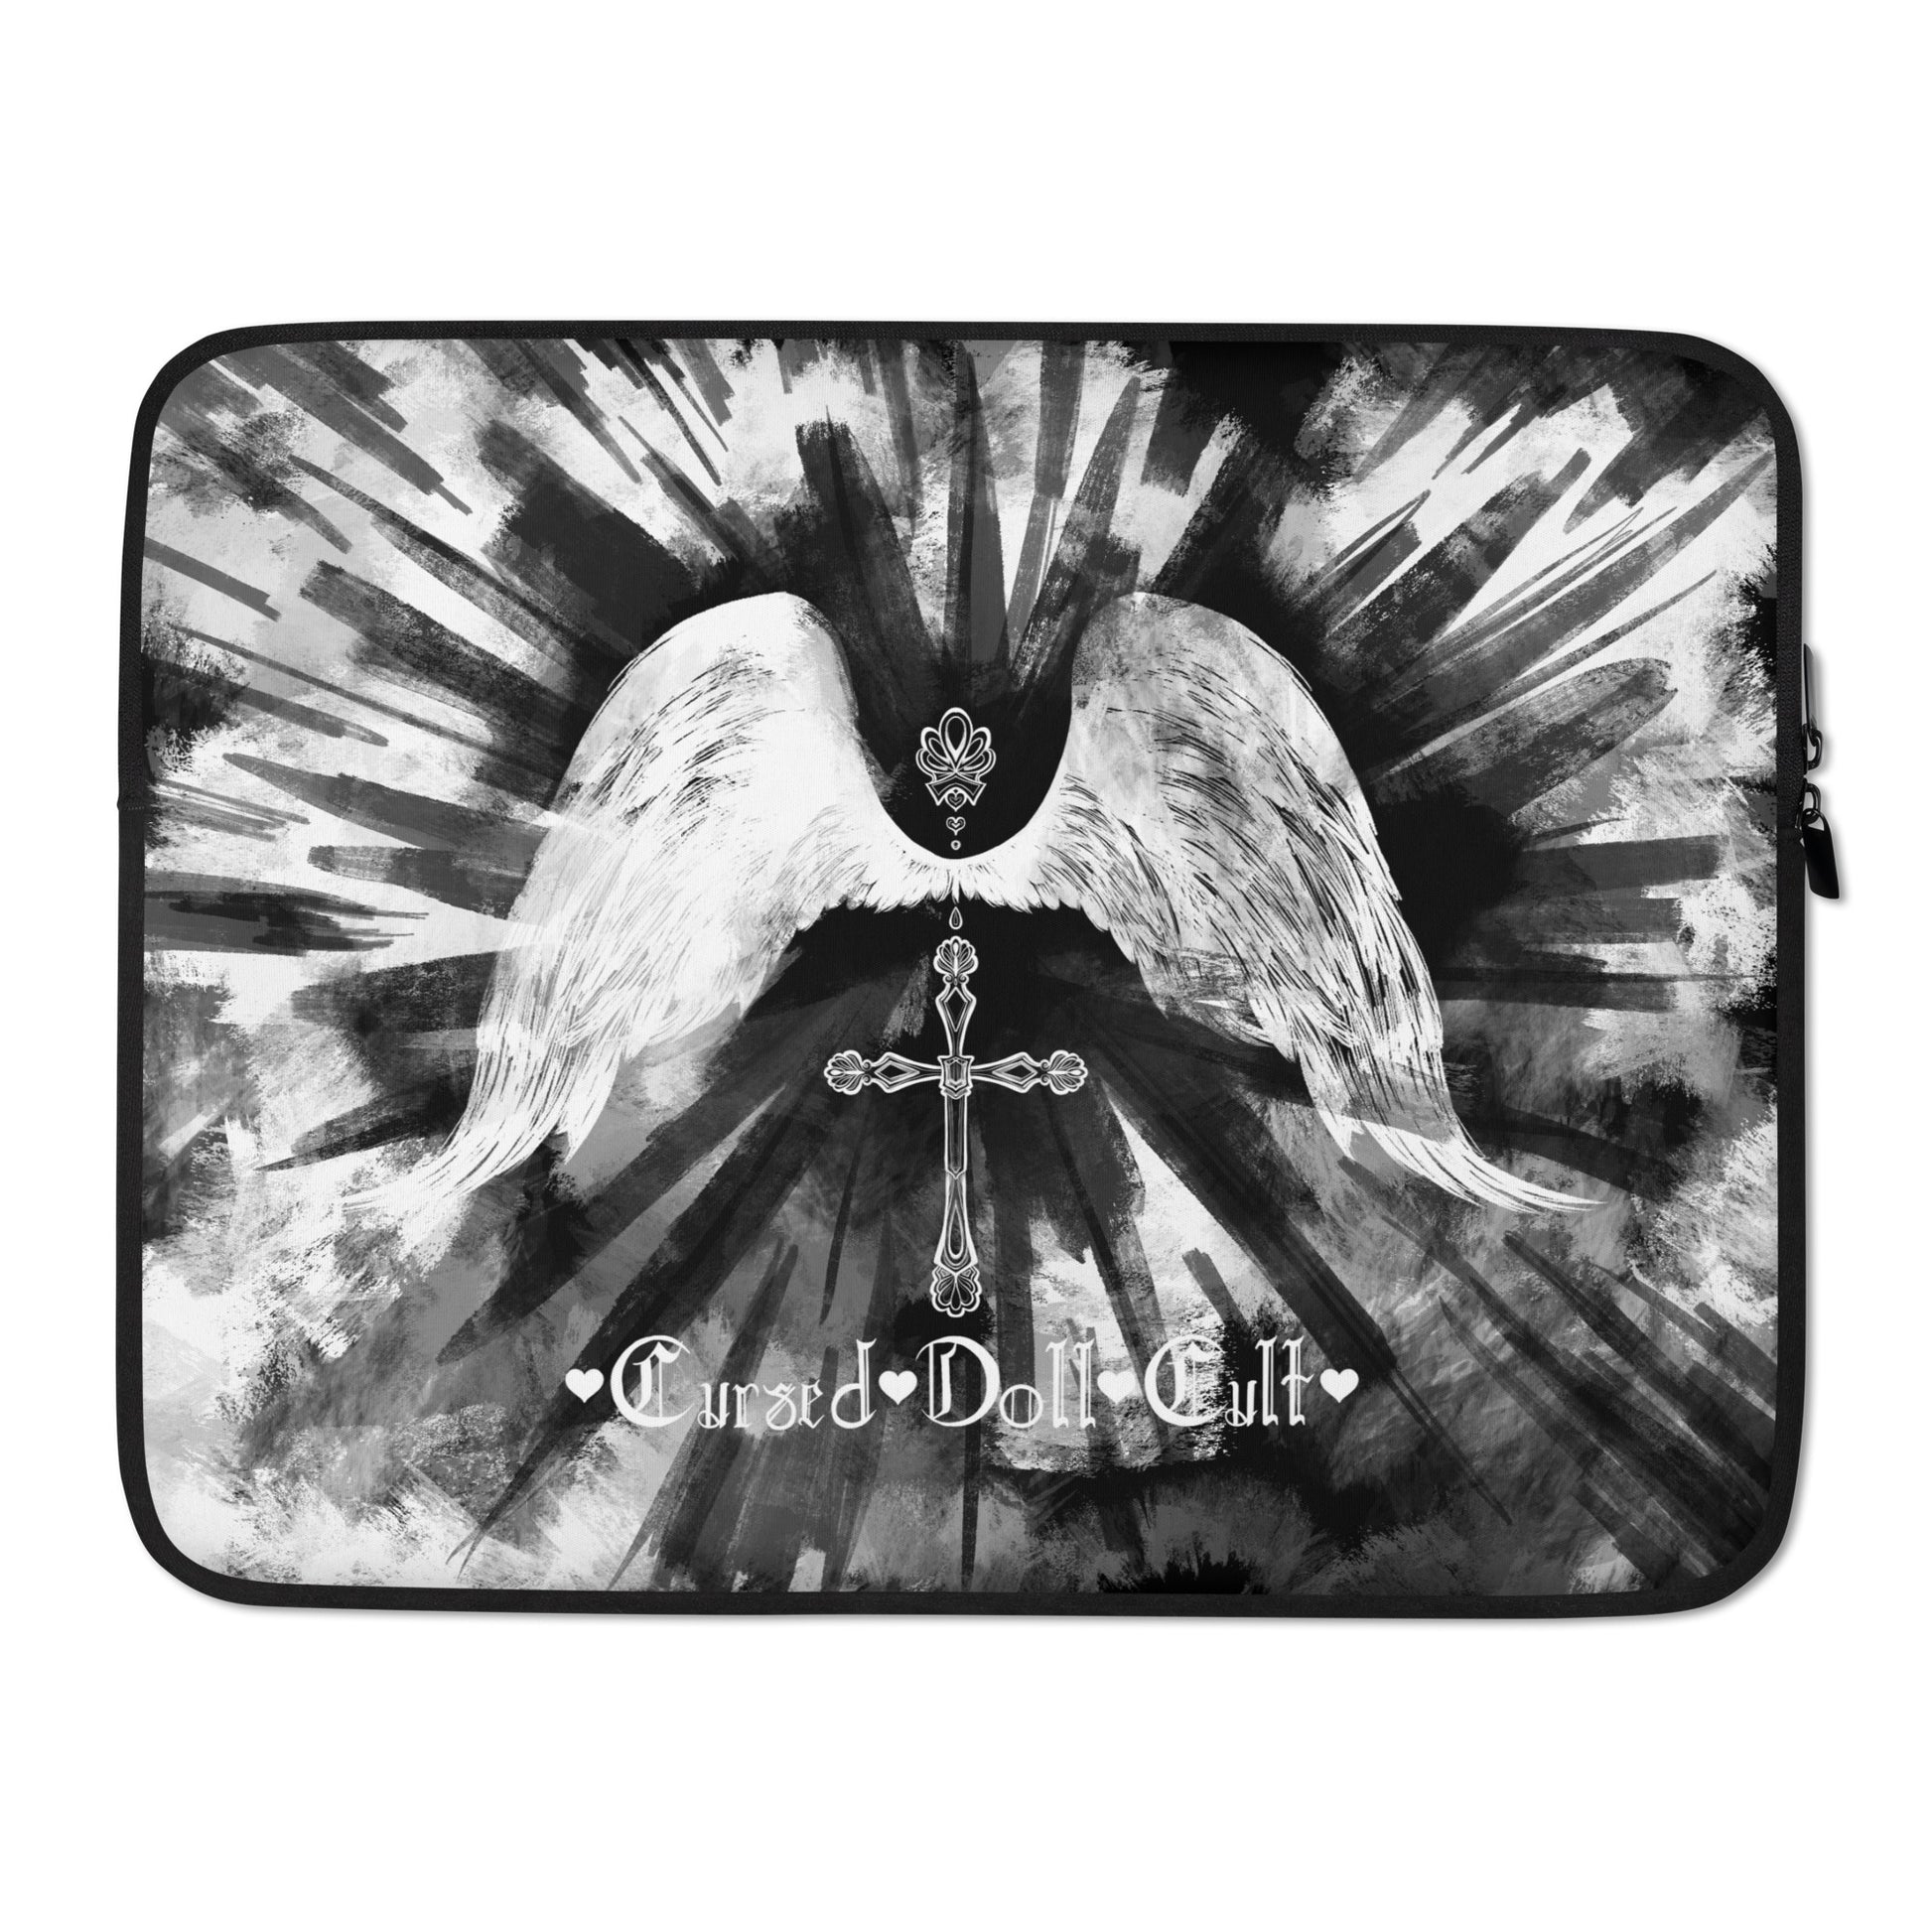 Monochrome Gothic style laptop bag with angel wings and gothic cross design